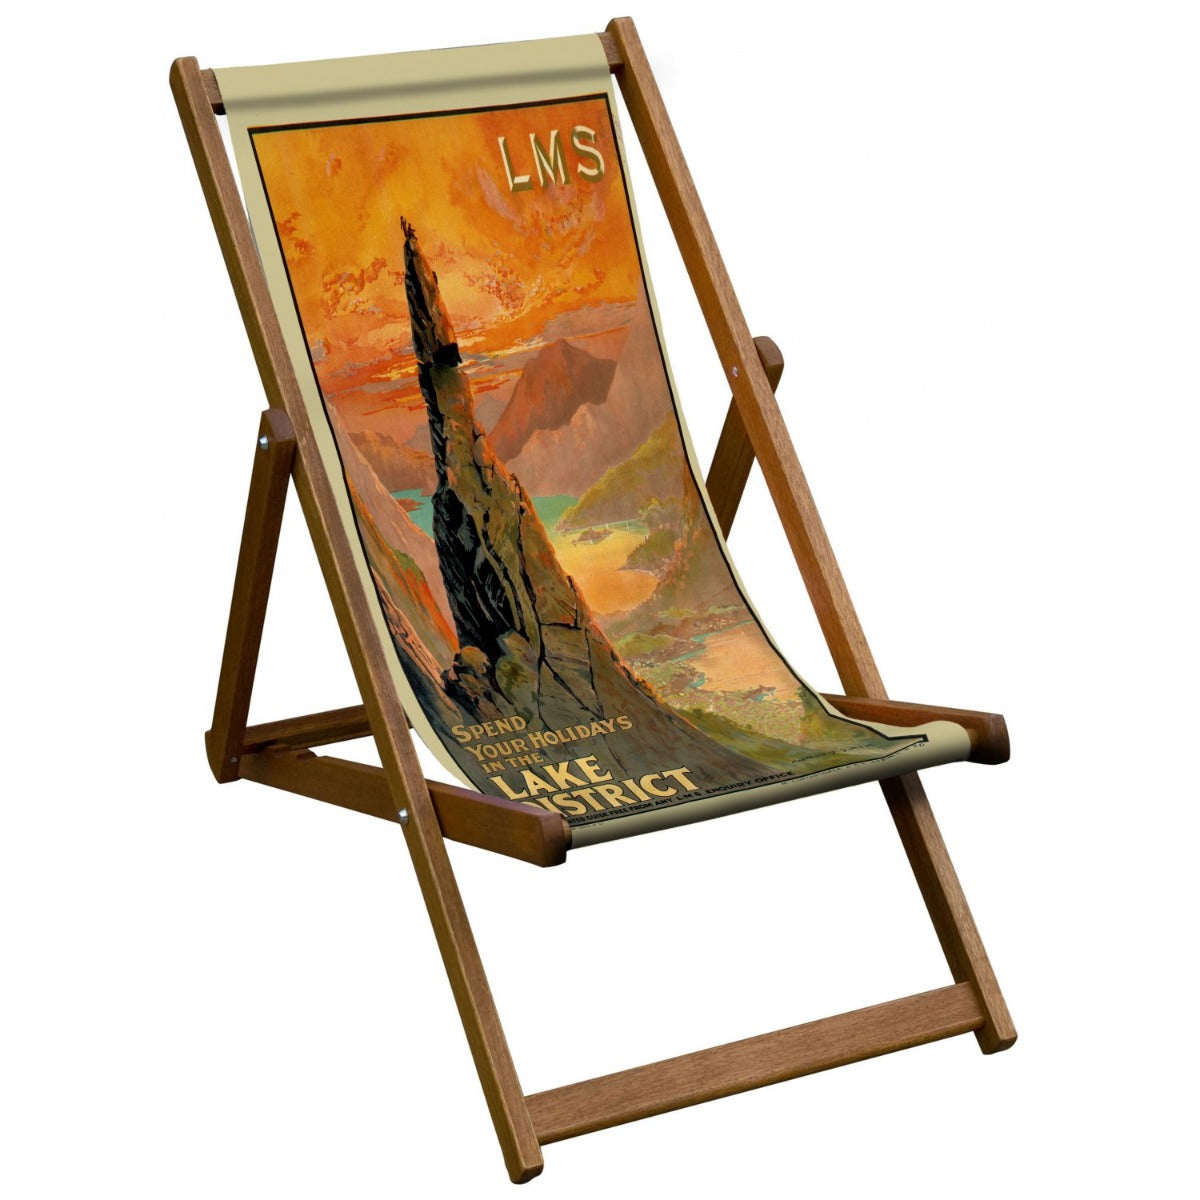 Vintage Inspired Wooden Deckchair- Lake District - National Railway Museum Poster